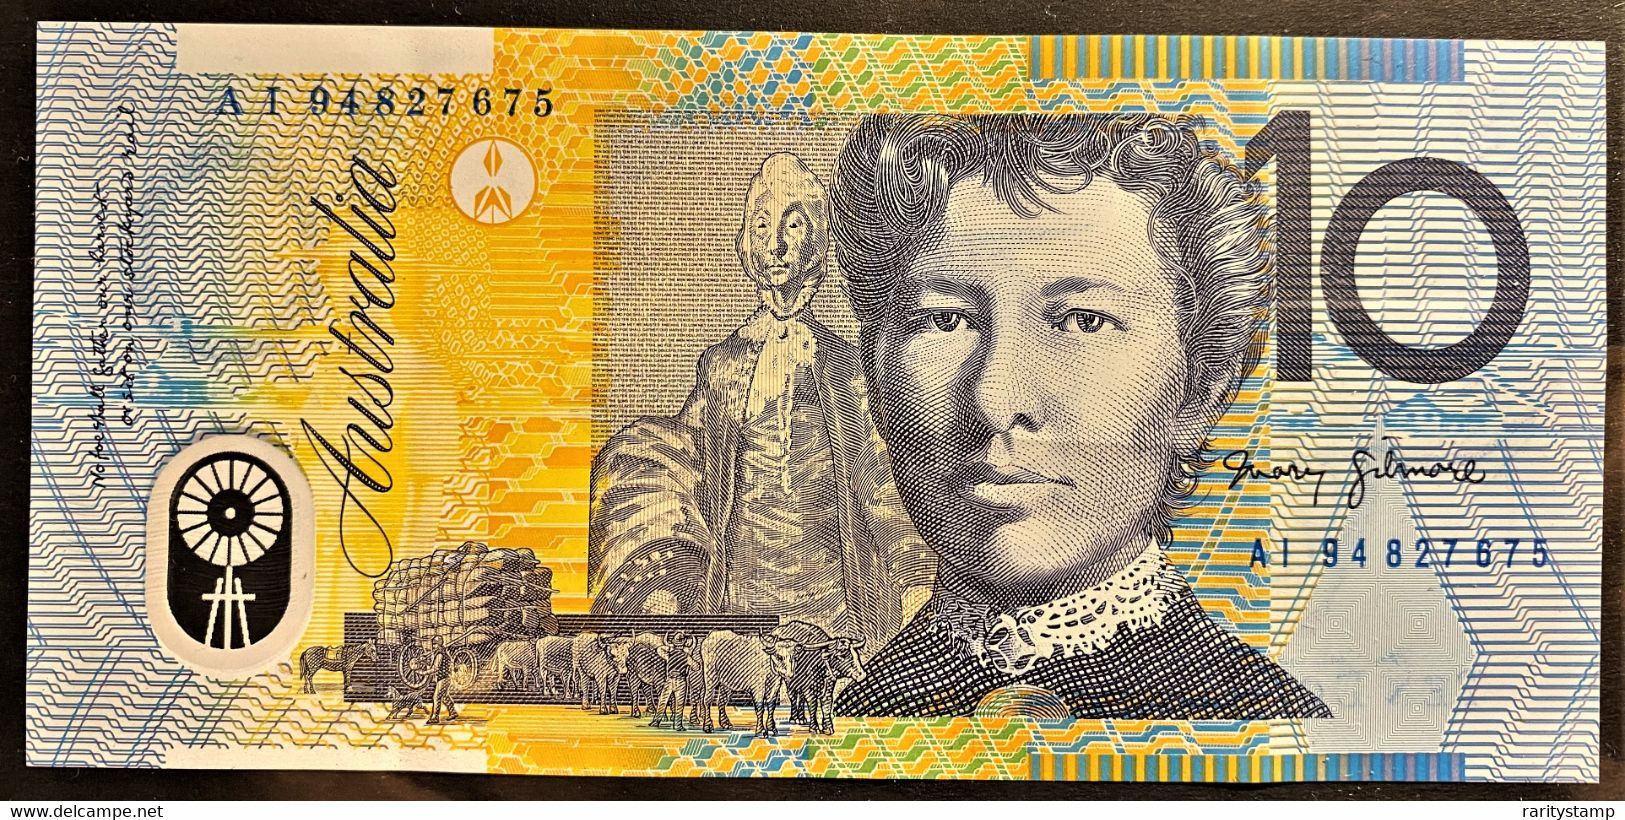 AUSTRALIA 1996  10 $ POLYMER QFDS - Local Currency